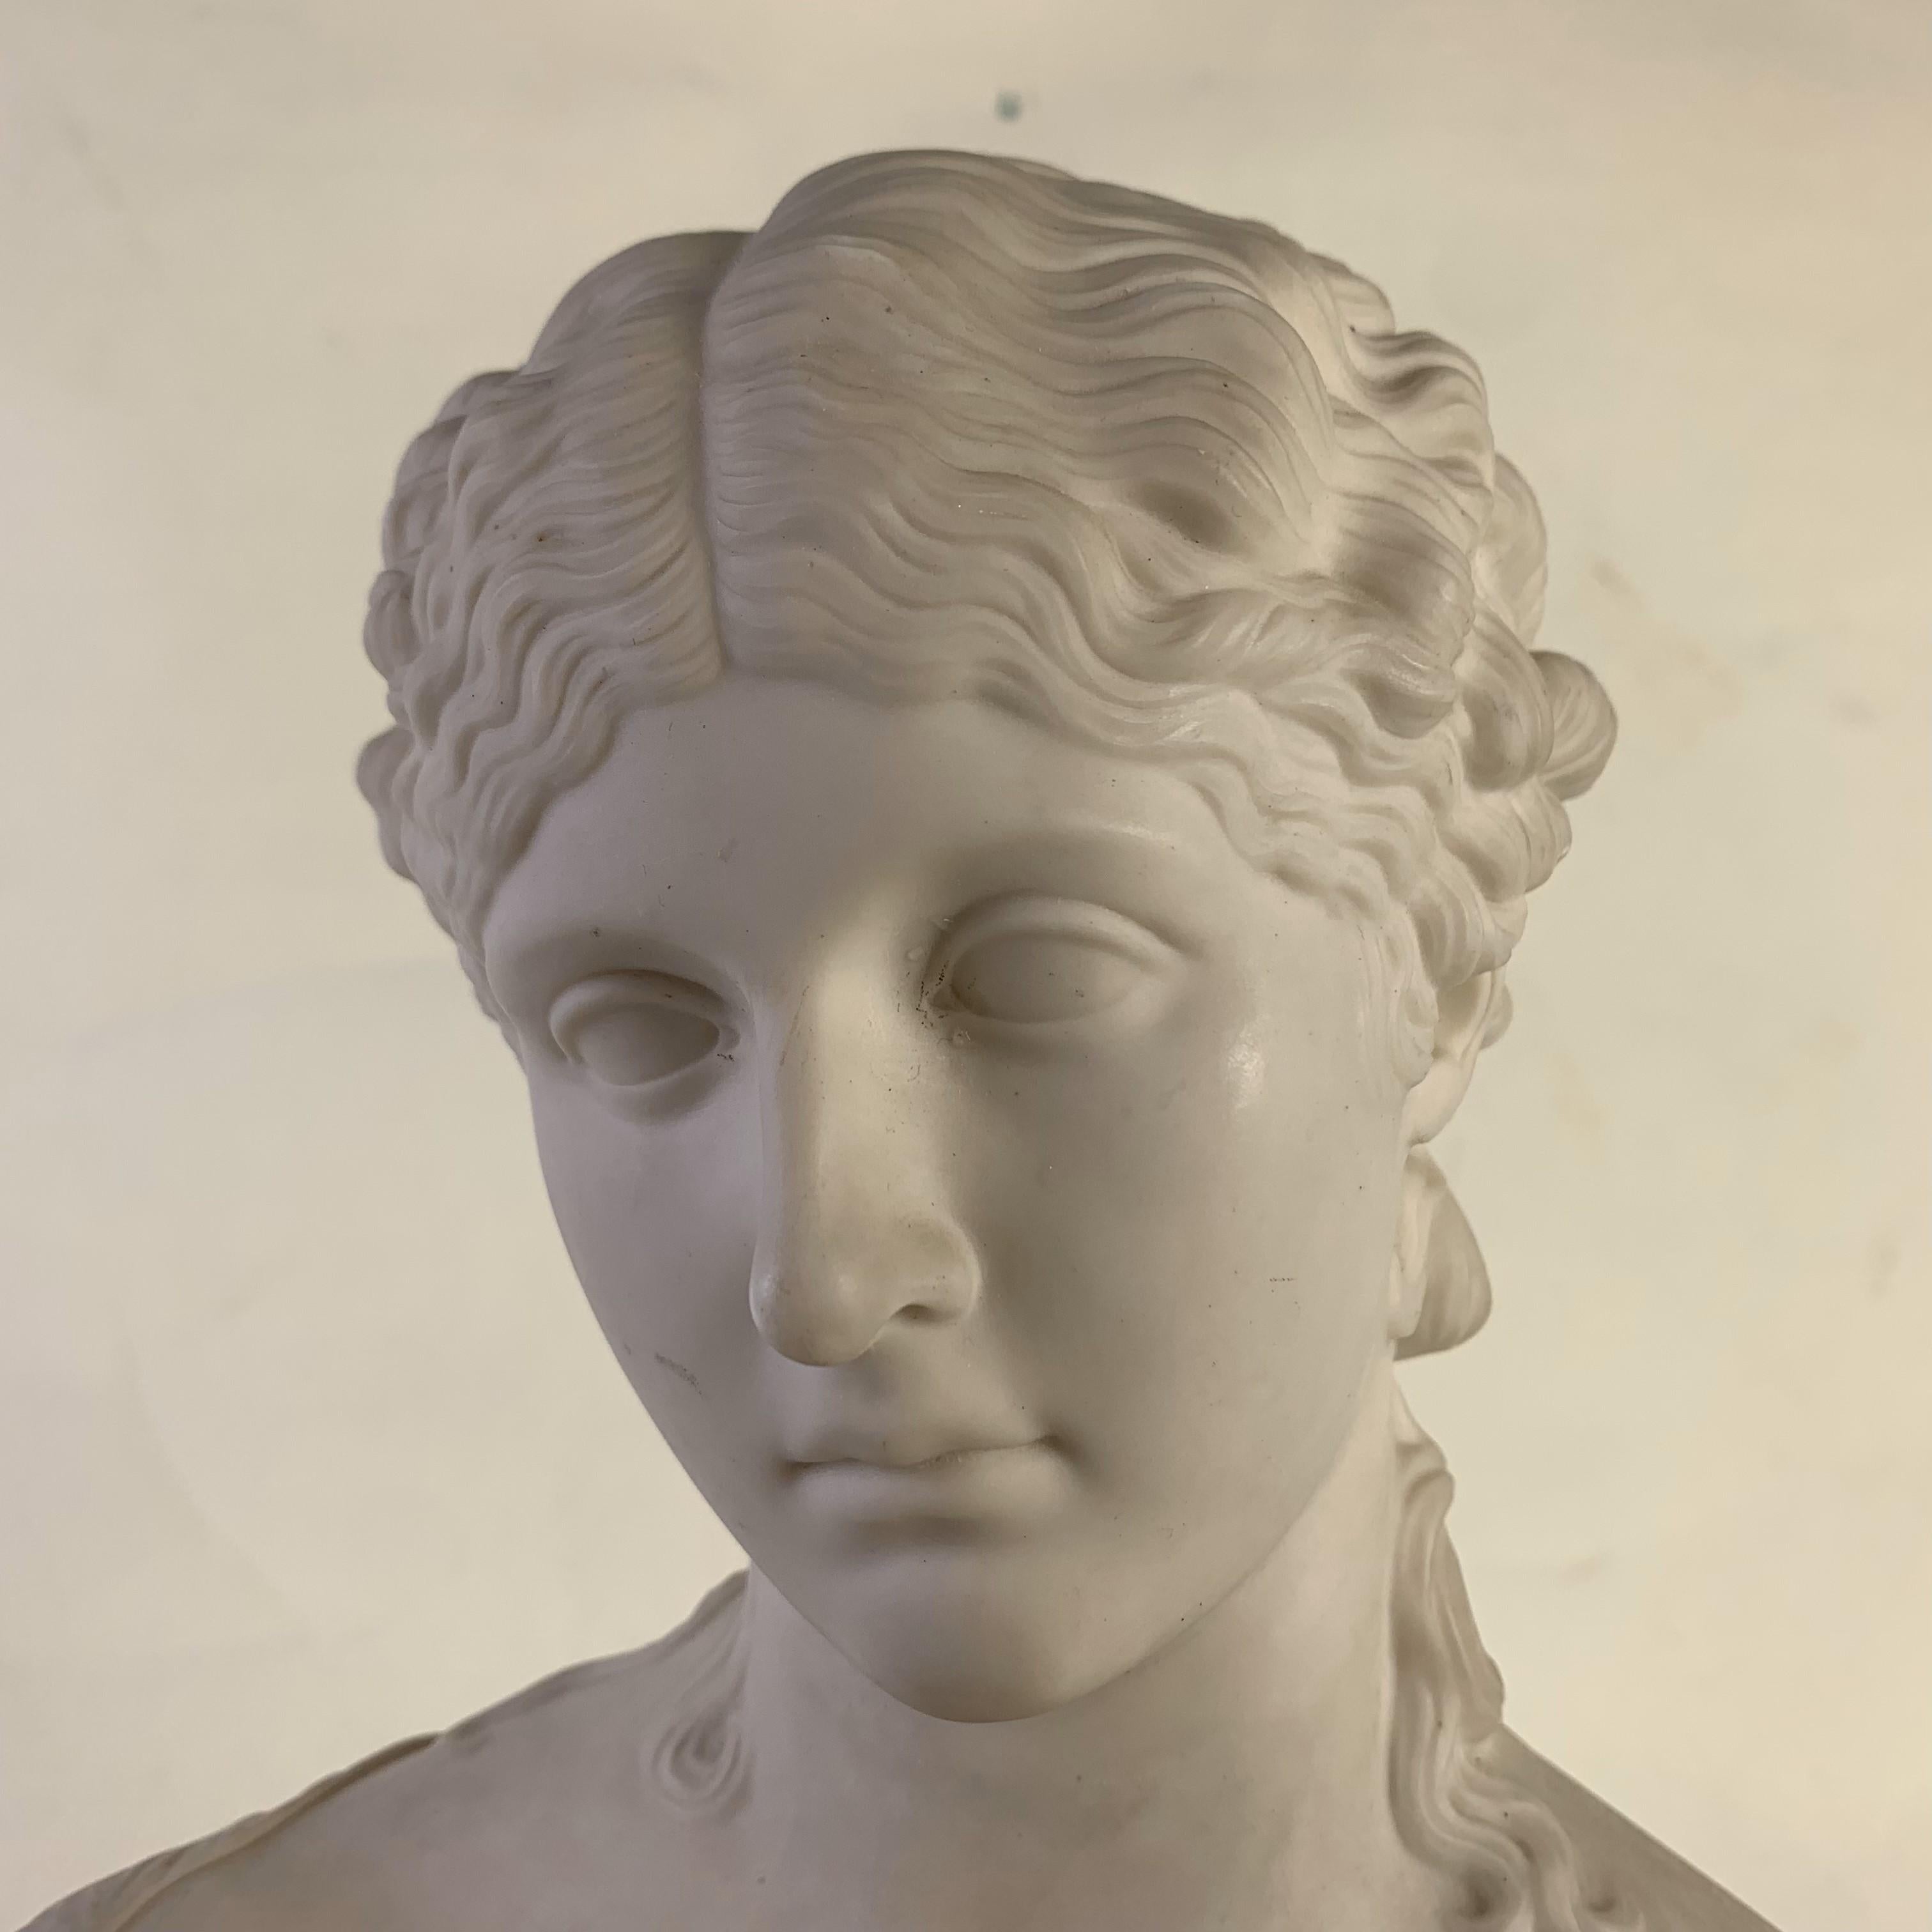 Parian Ware Bust Titled 'Clytie' Sculpted by C. Delpech 1